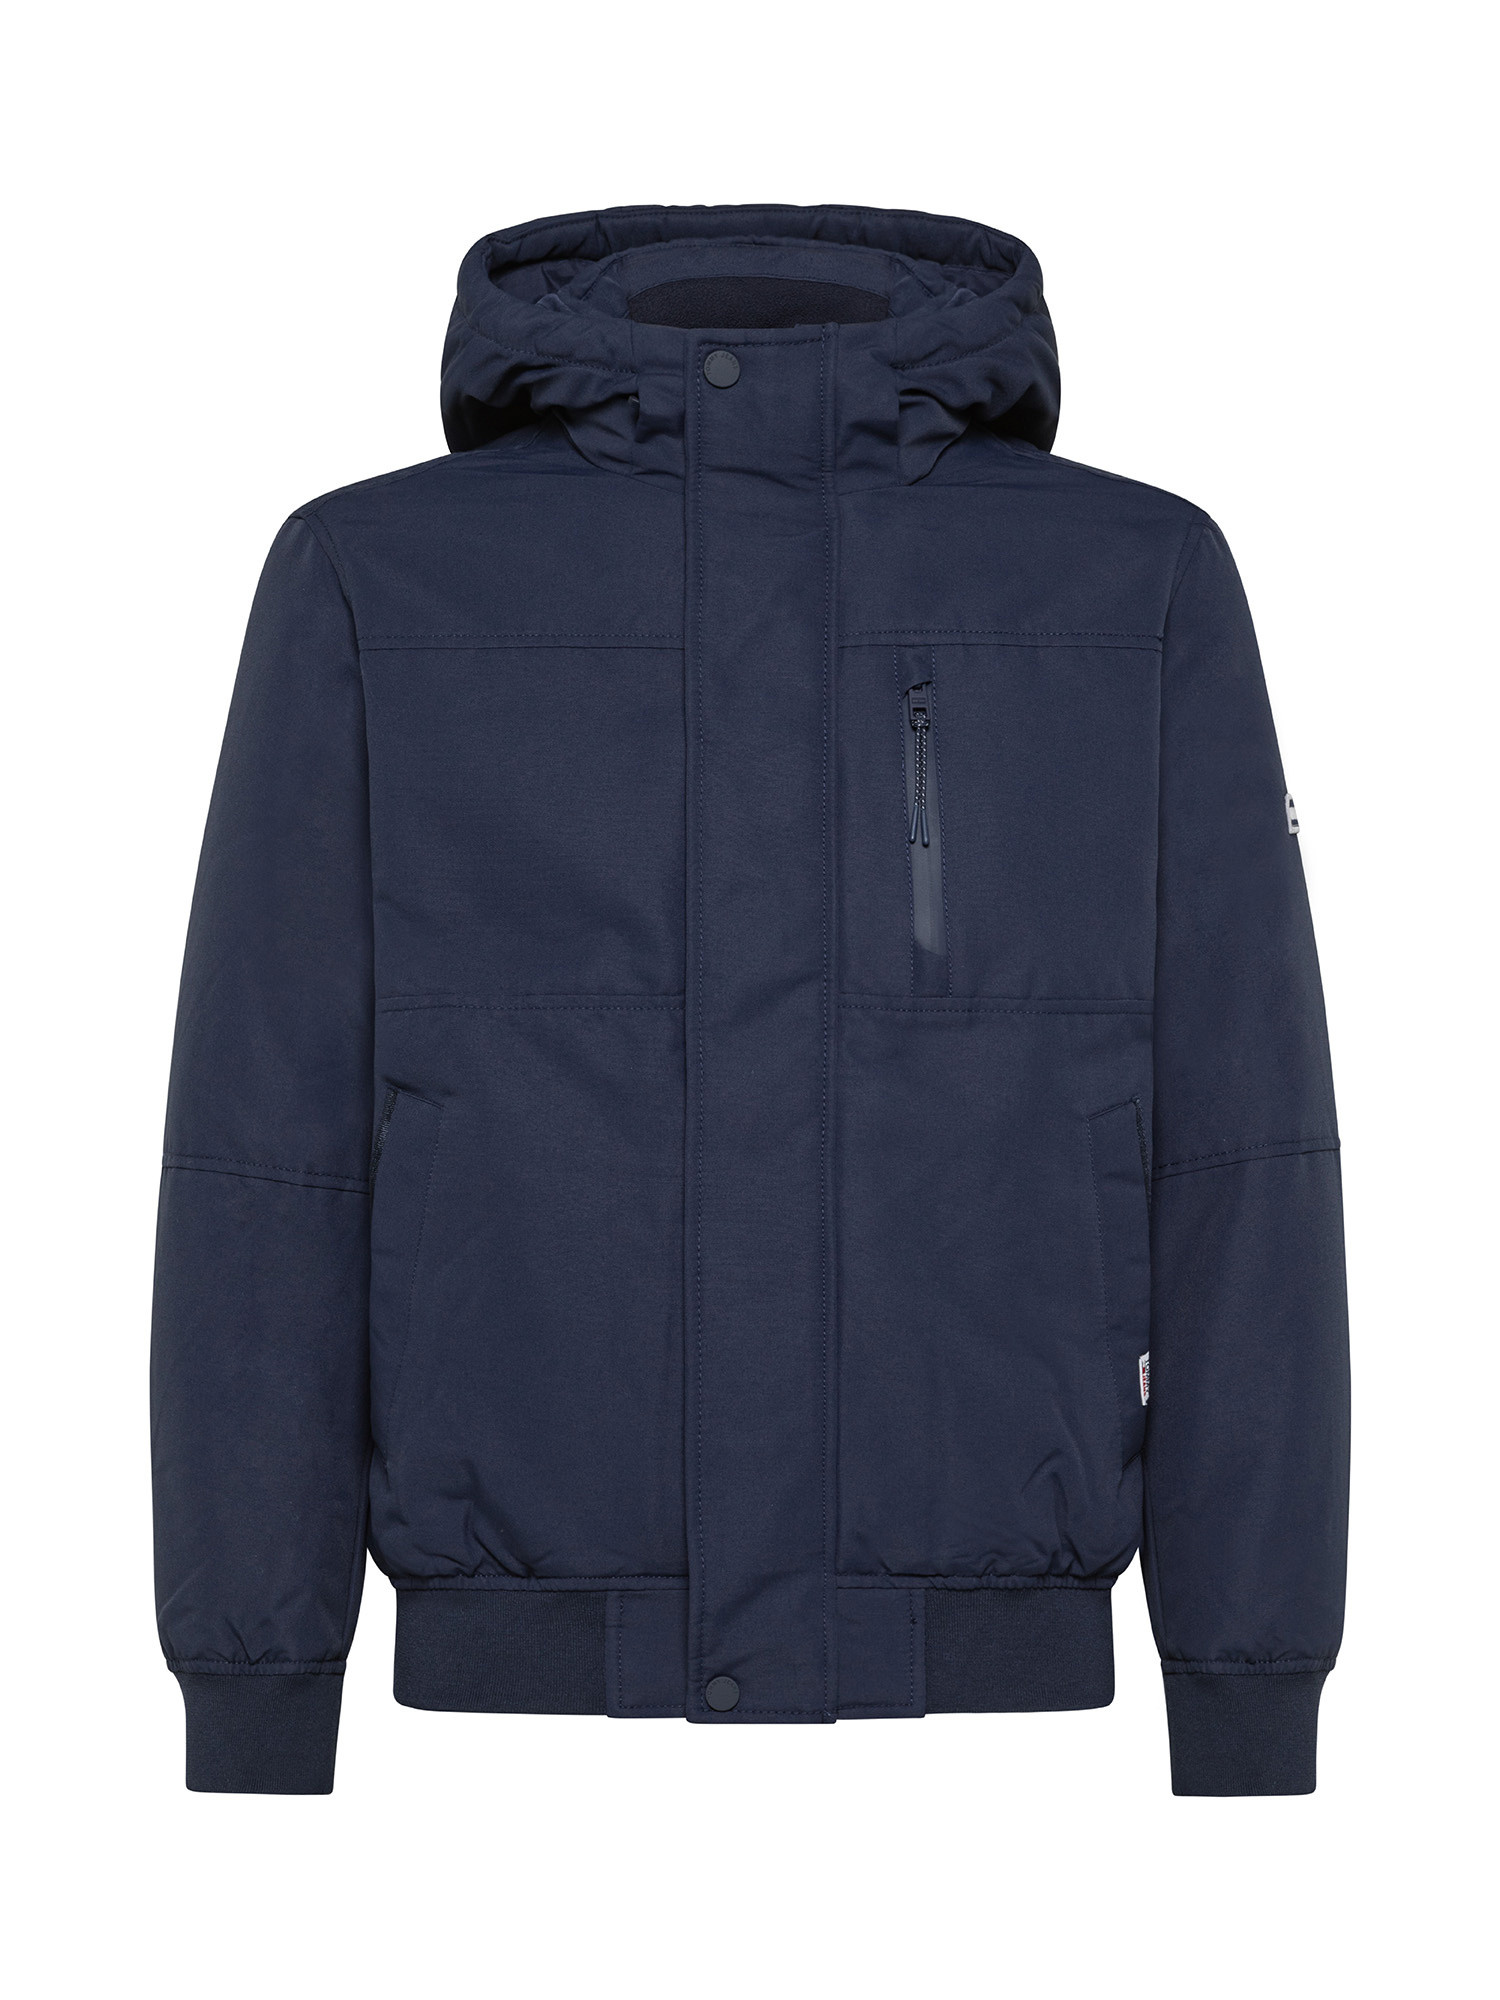 Tommy Jeans - Bomber con cappuccio, Blu, large image number 0